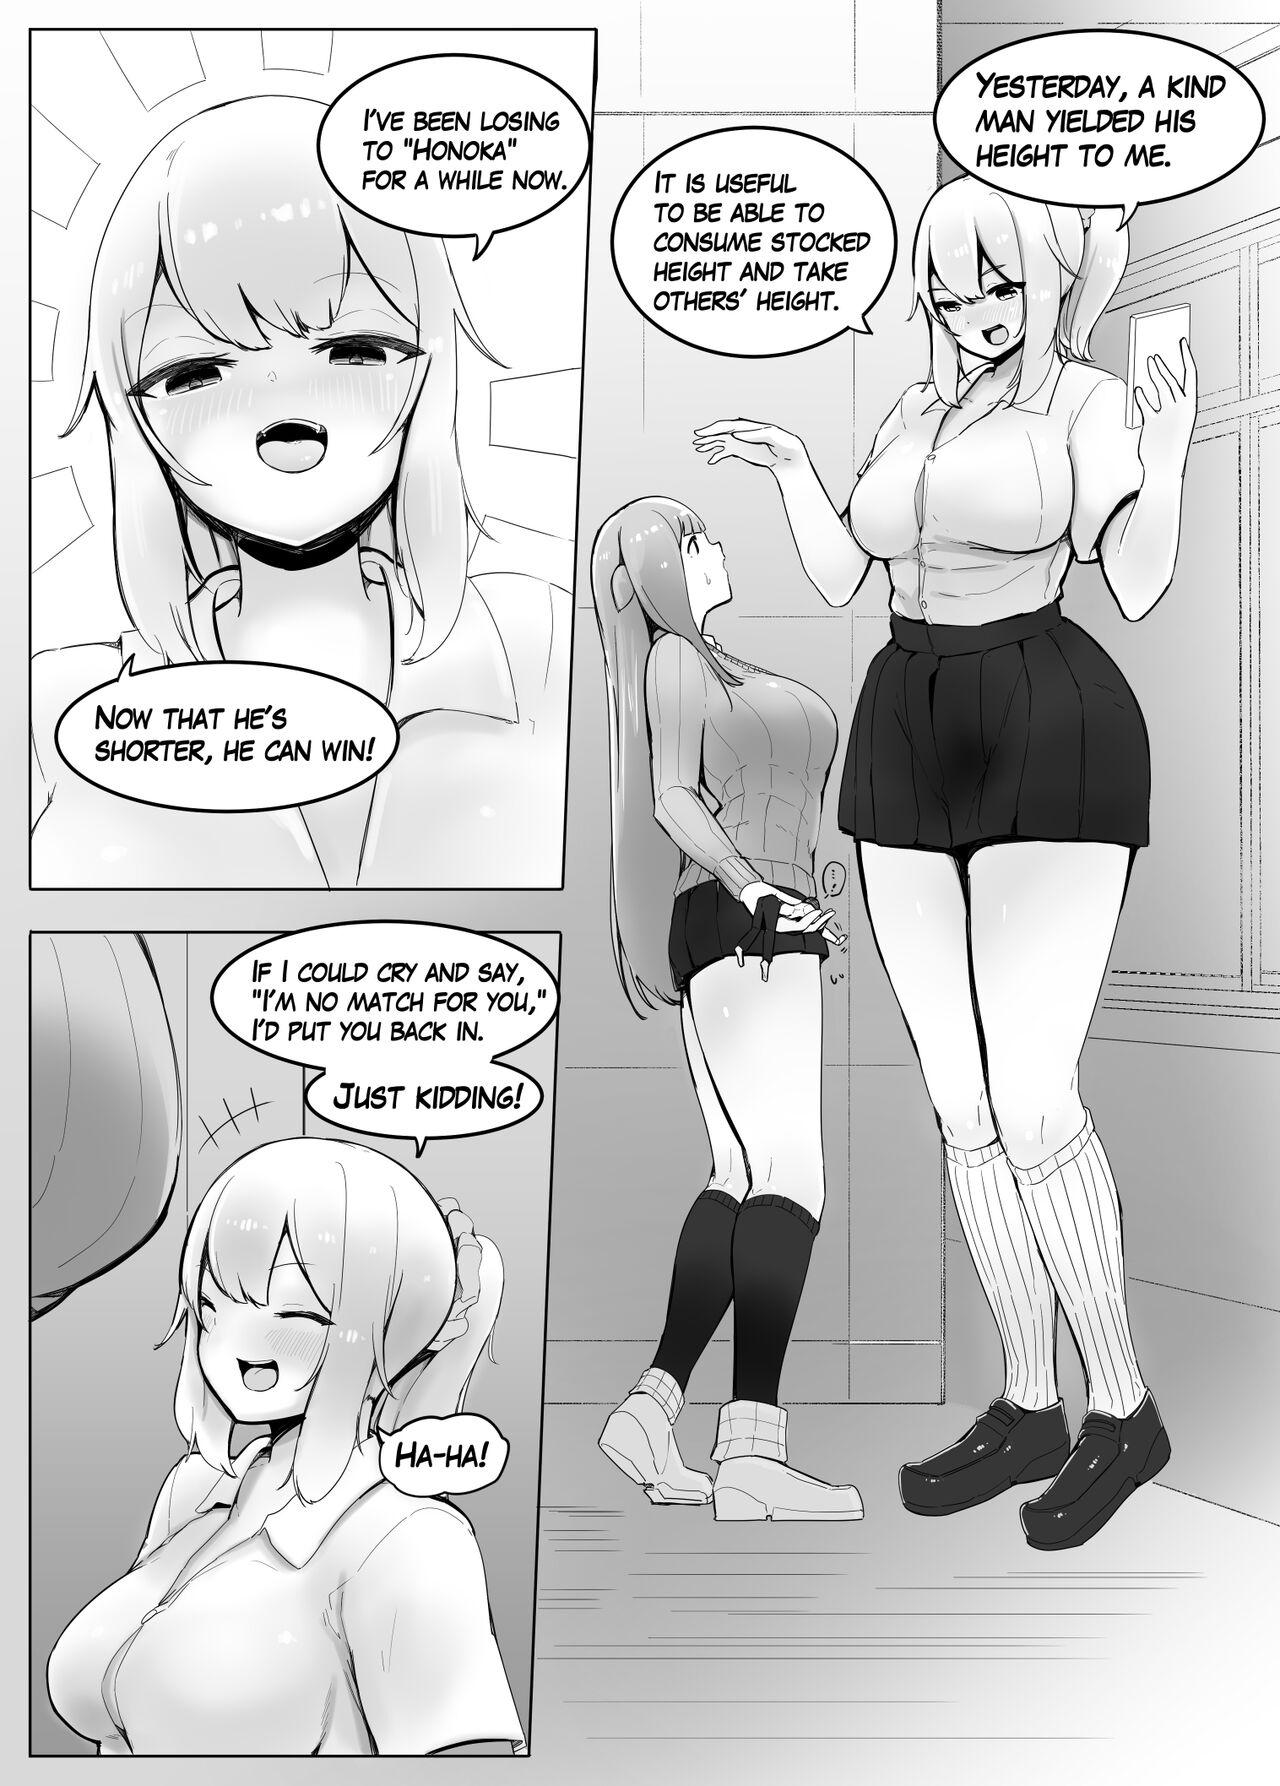 No Condom The Girl Takes My Height. 2 African - Page 2